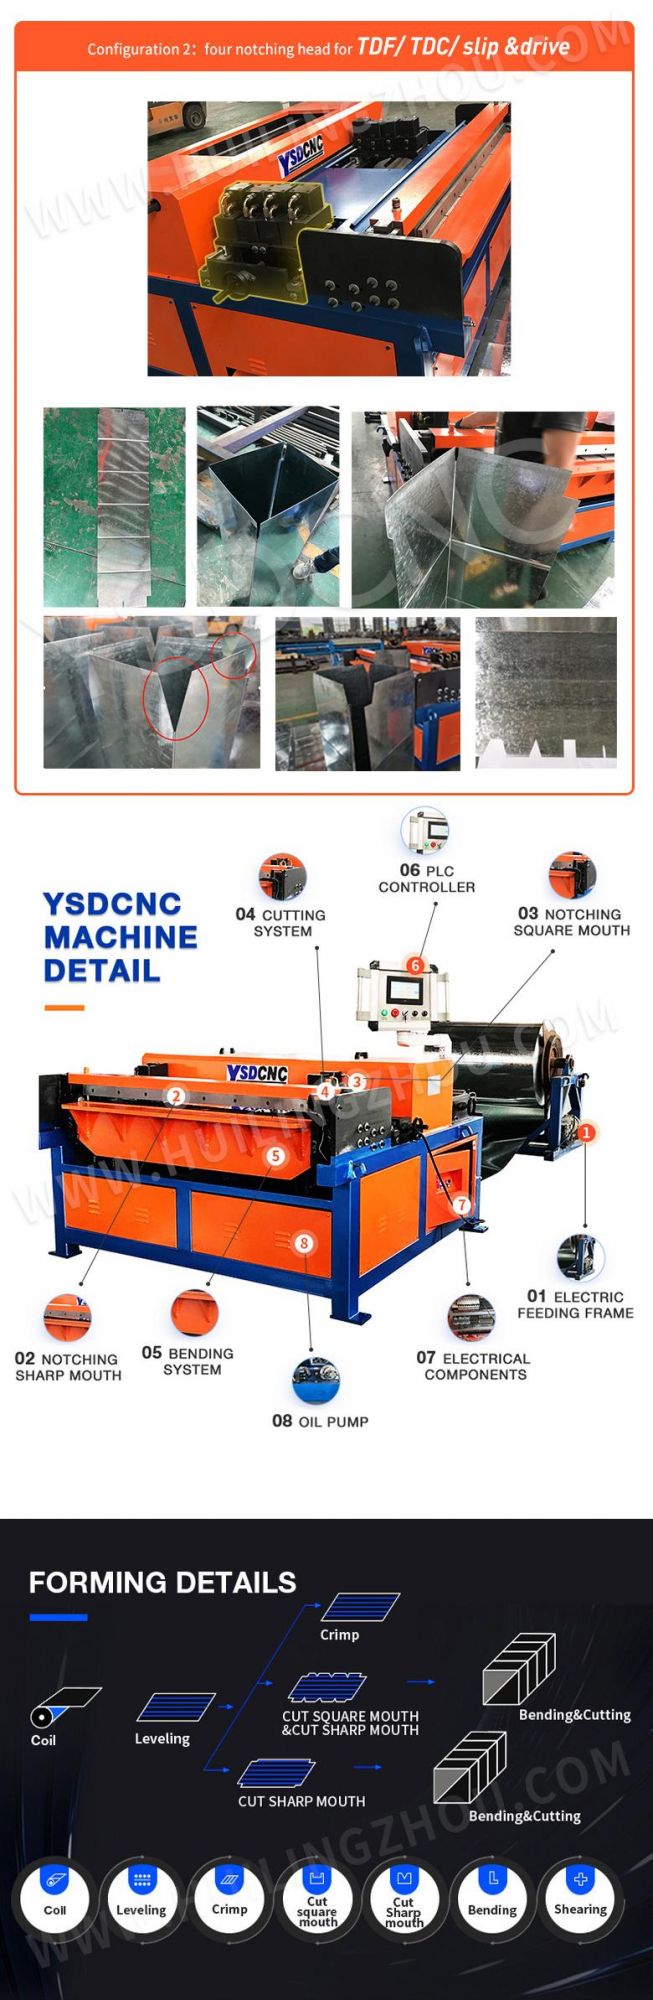 Duct Auto Forming Machine Air Duct Production Auto Line 3